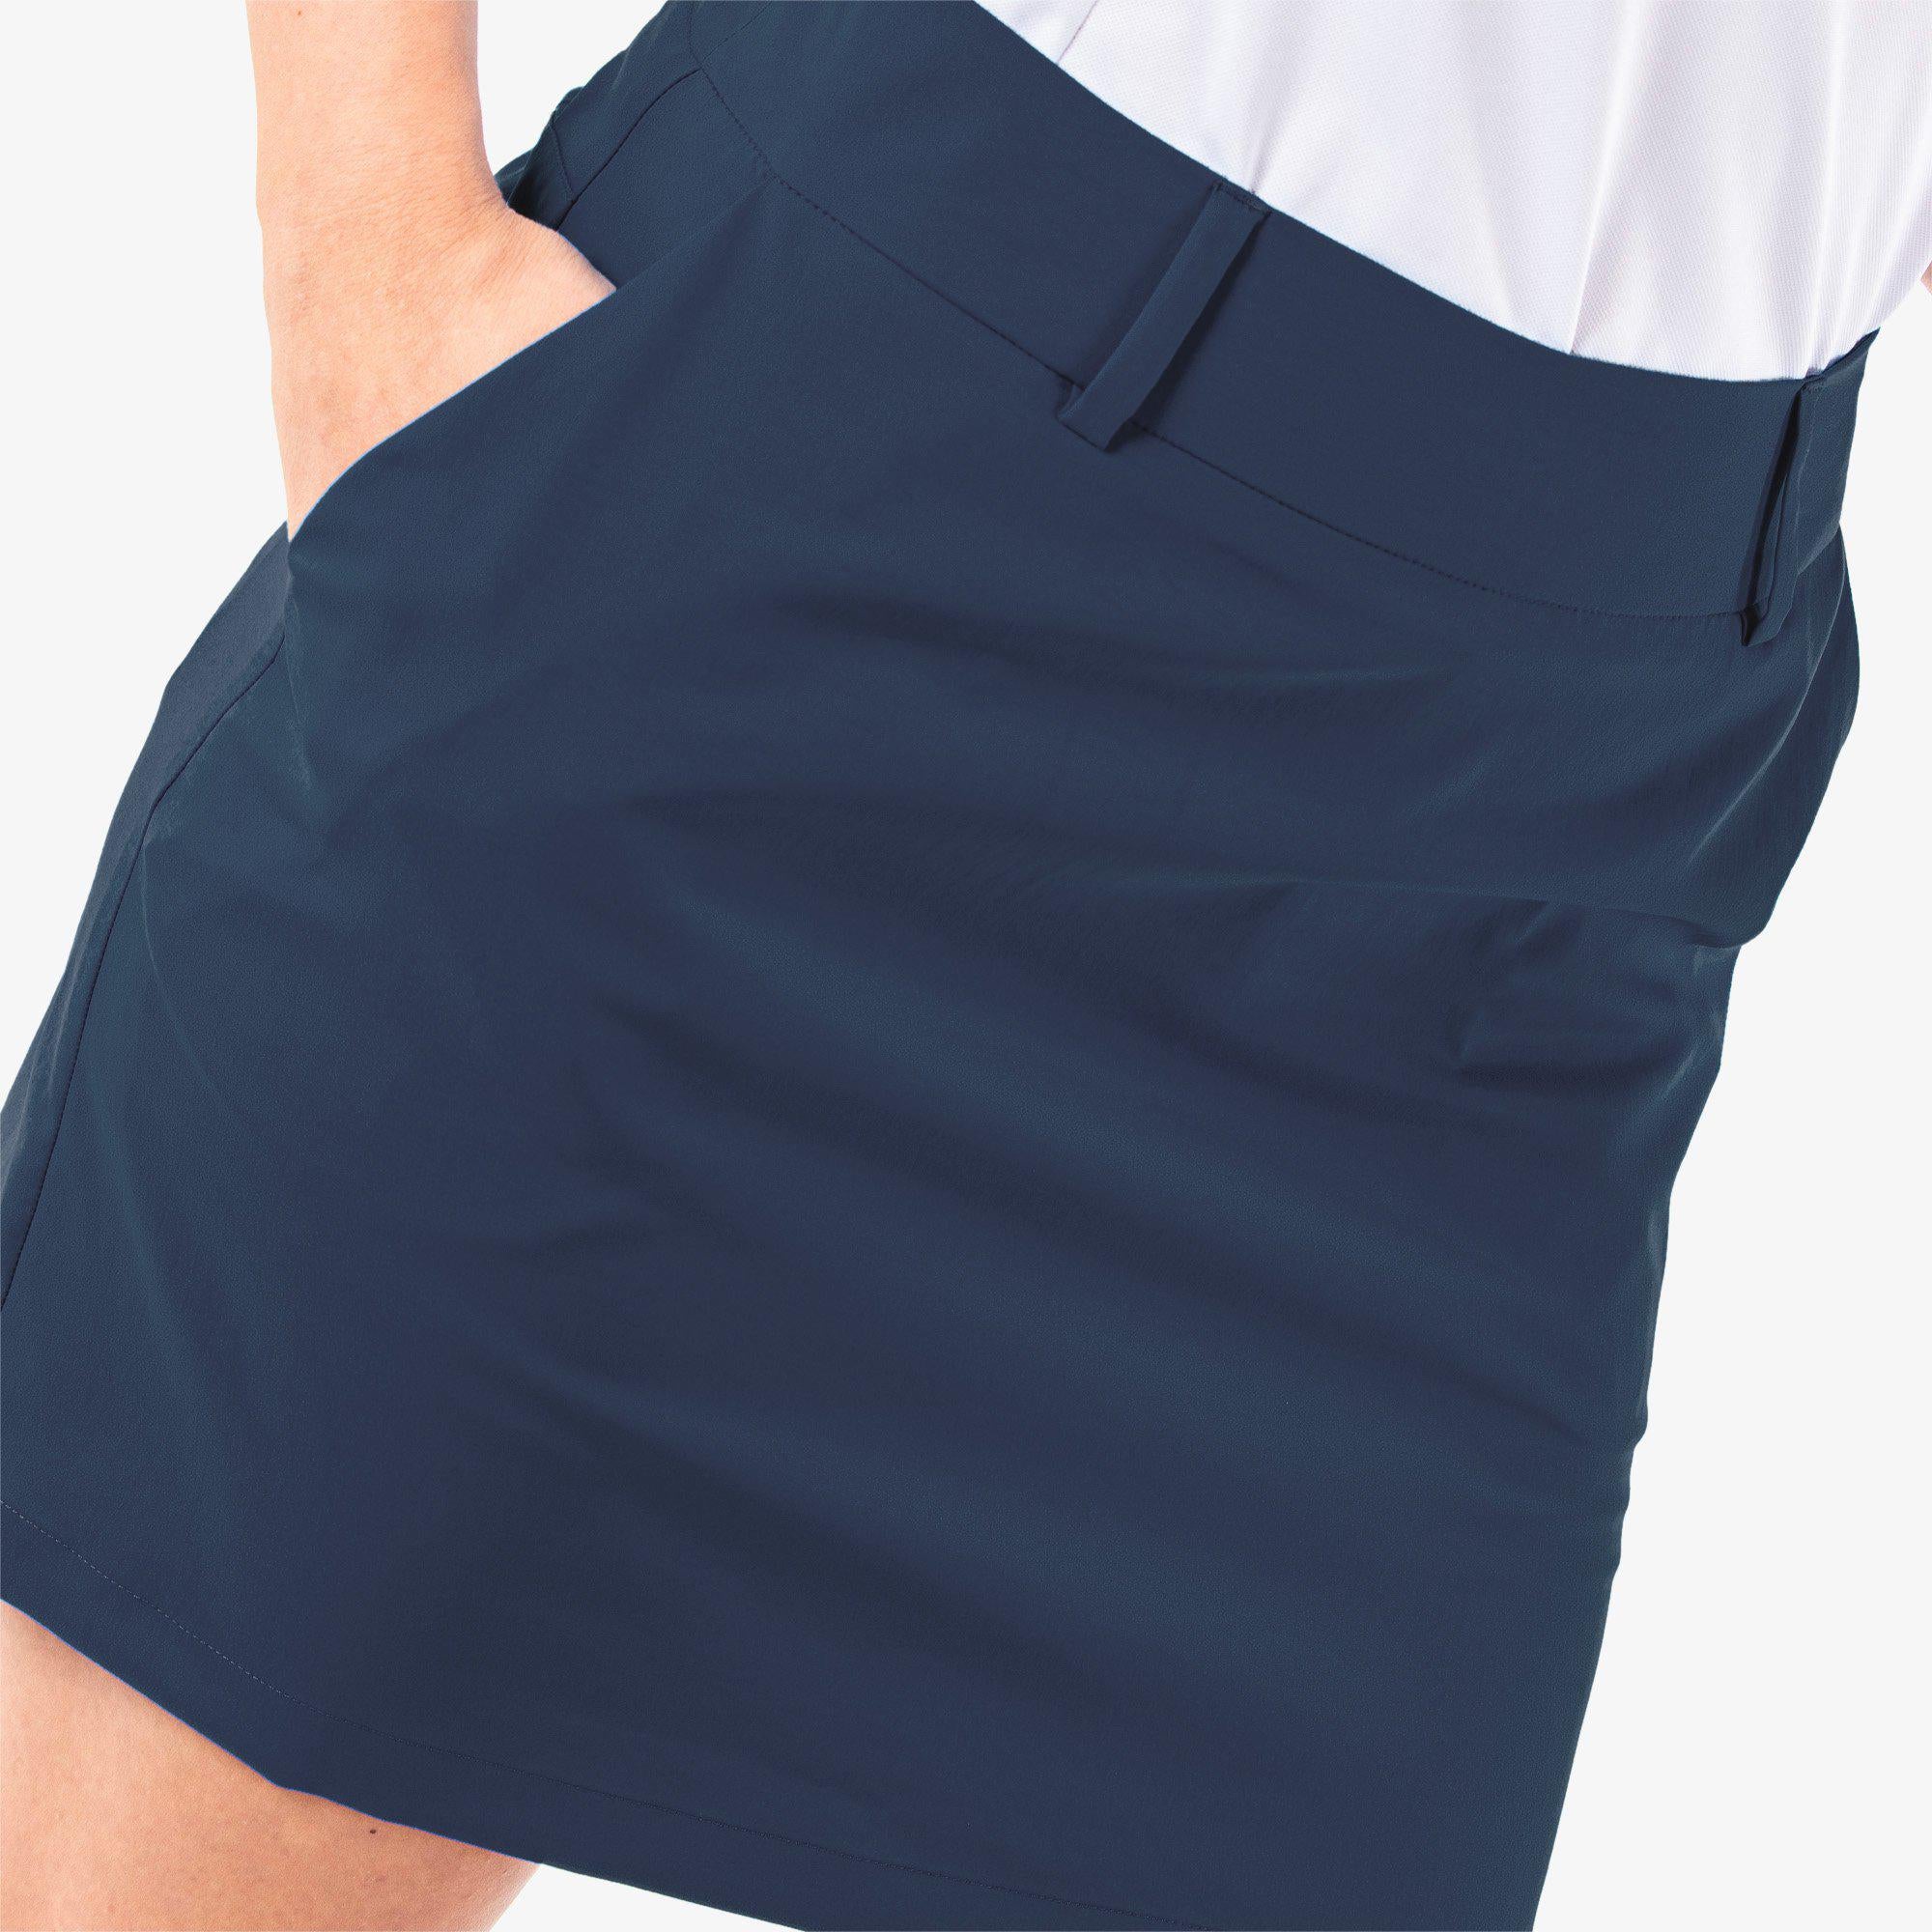 Golf Skirts for Women - Many Colors and Sizes | Galvin Green